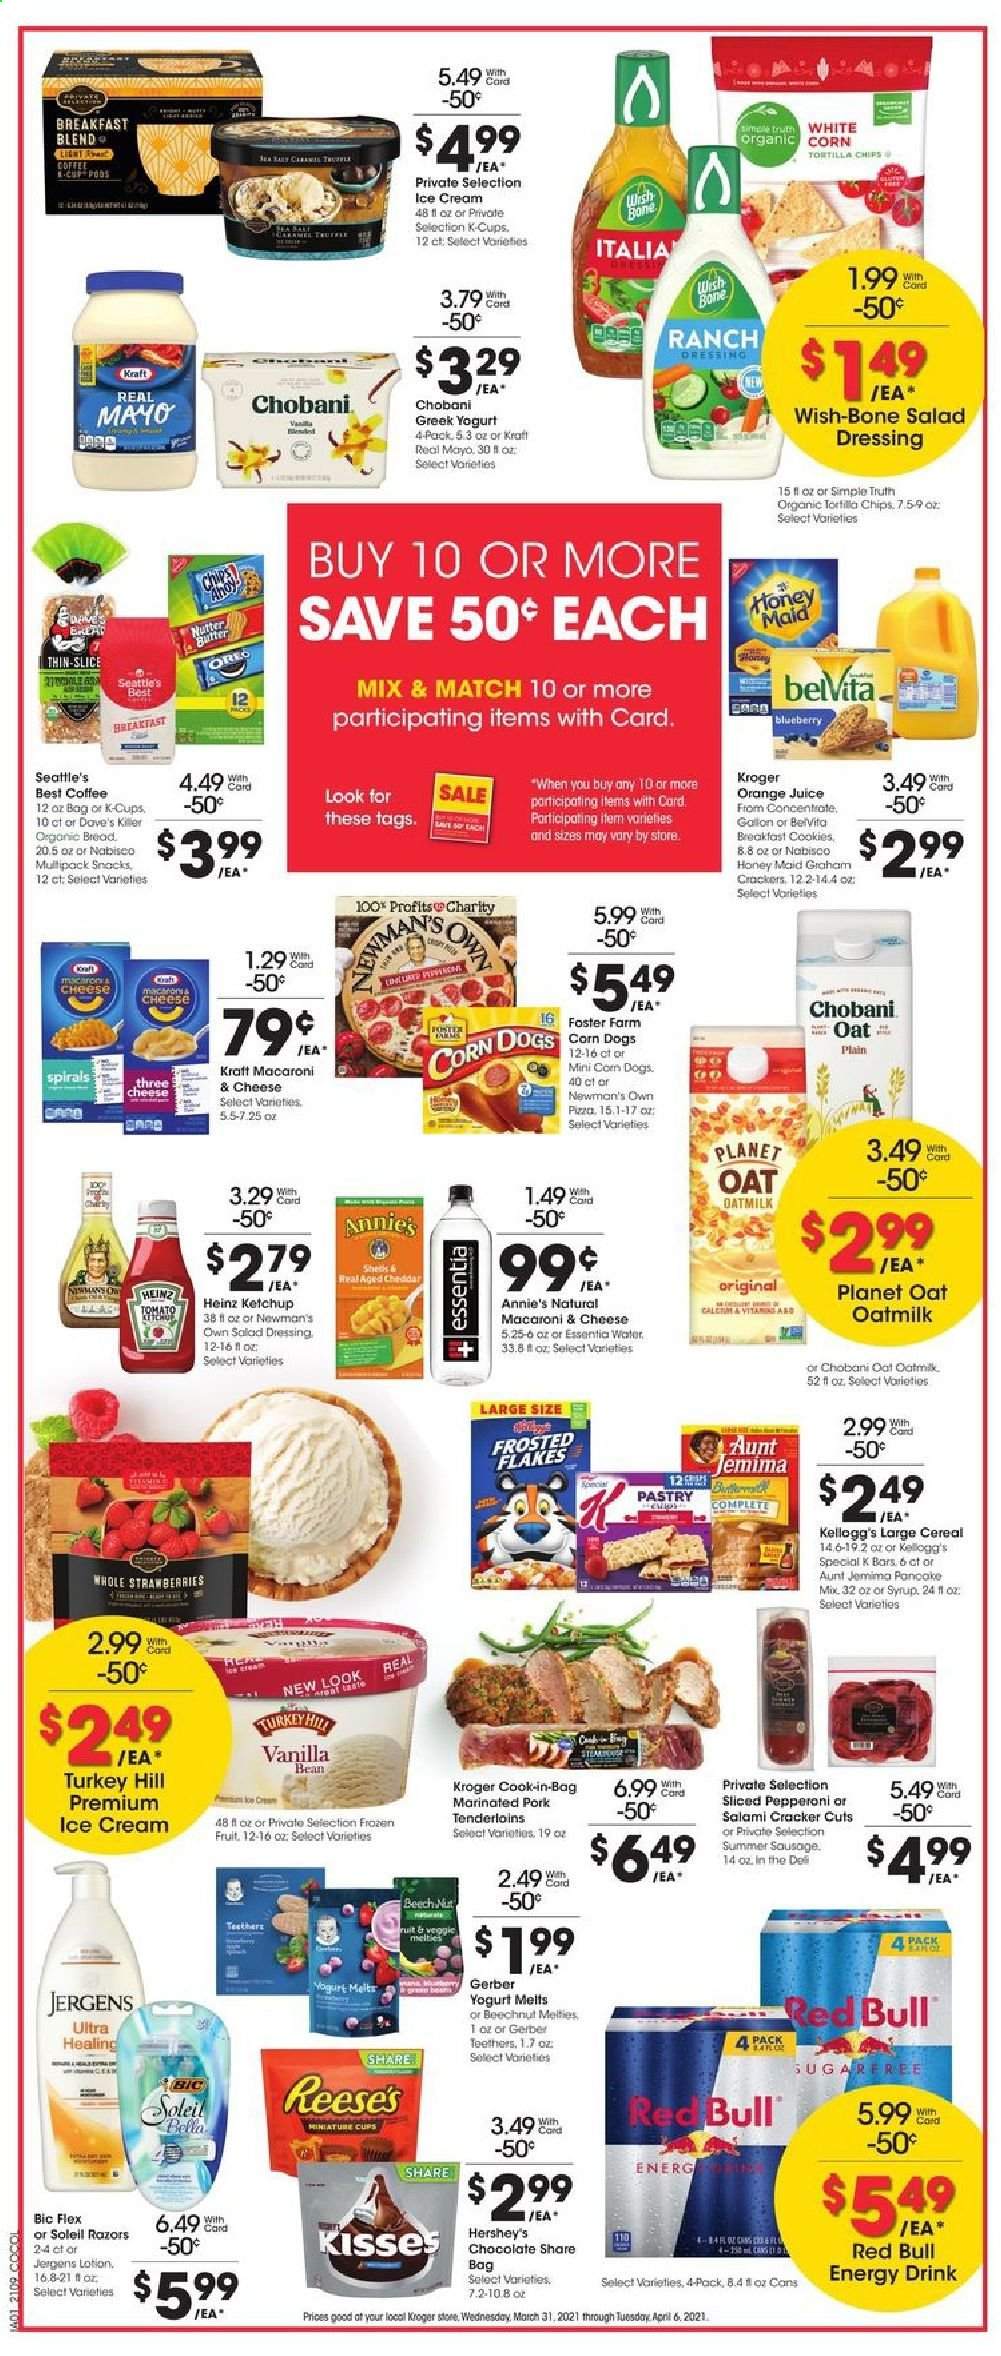 thumbnail - Kroger Flyer - 03/31/2021 - 04/06/2021 - Sales products - bread, pancakes, macaroons, macaroni & cheese, pizza, Annie's, Kraft®, salami, pepperoni, cheddar, greek yoghurt, Oreo, yoghurt, Chobani, oat milk, butter, mayonnaise, ice cream, Reese's, Hershey's, corn, strawberries, cookies, graham crackers, chocolate, crackers, Kellogg's, Gerber, tortilla chips, snack, oats, Heinz, cereals, Frosted Flakes, belVita, Honey Maid, salad dressing, ketchup, dressing, syrup, orange juice, juice, energy drink, Red Bull, coffee, coffee capsules, K-Cups, breakfast blend, pork meat, marinated pork, Bella, body lotion, Jergens, BIC. Page 4.